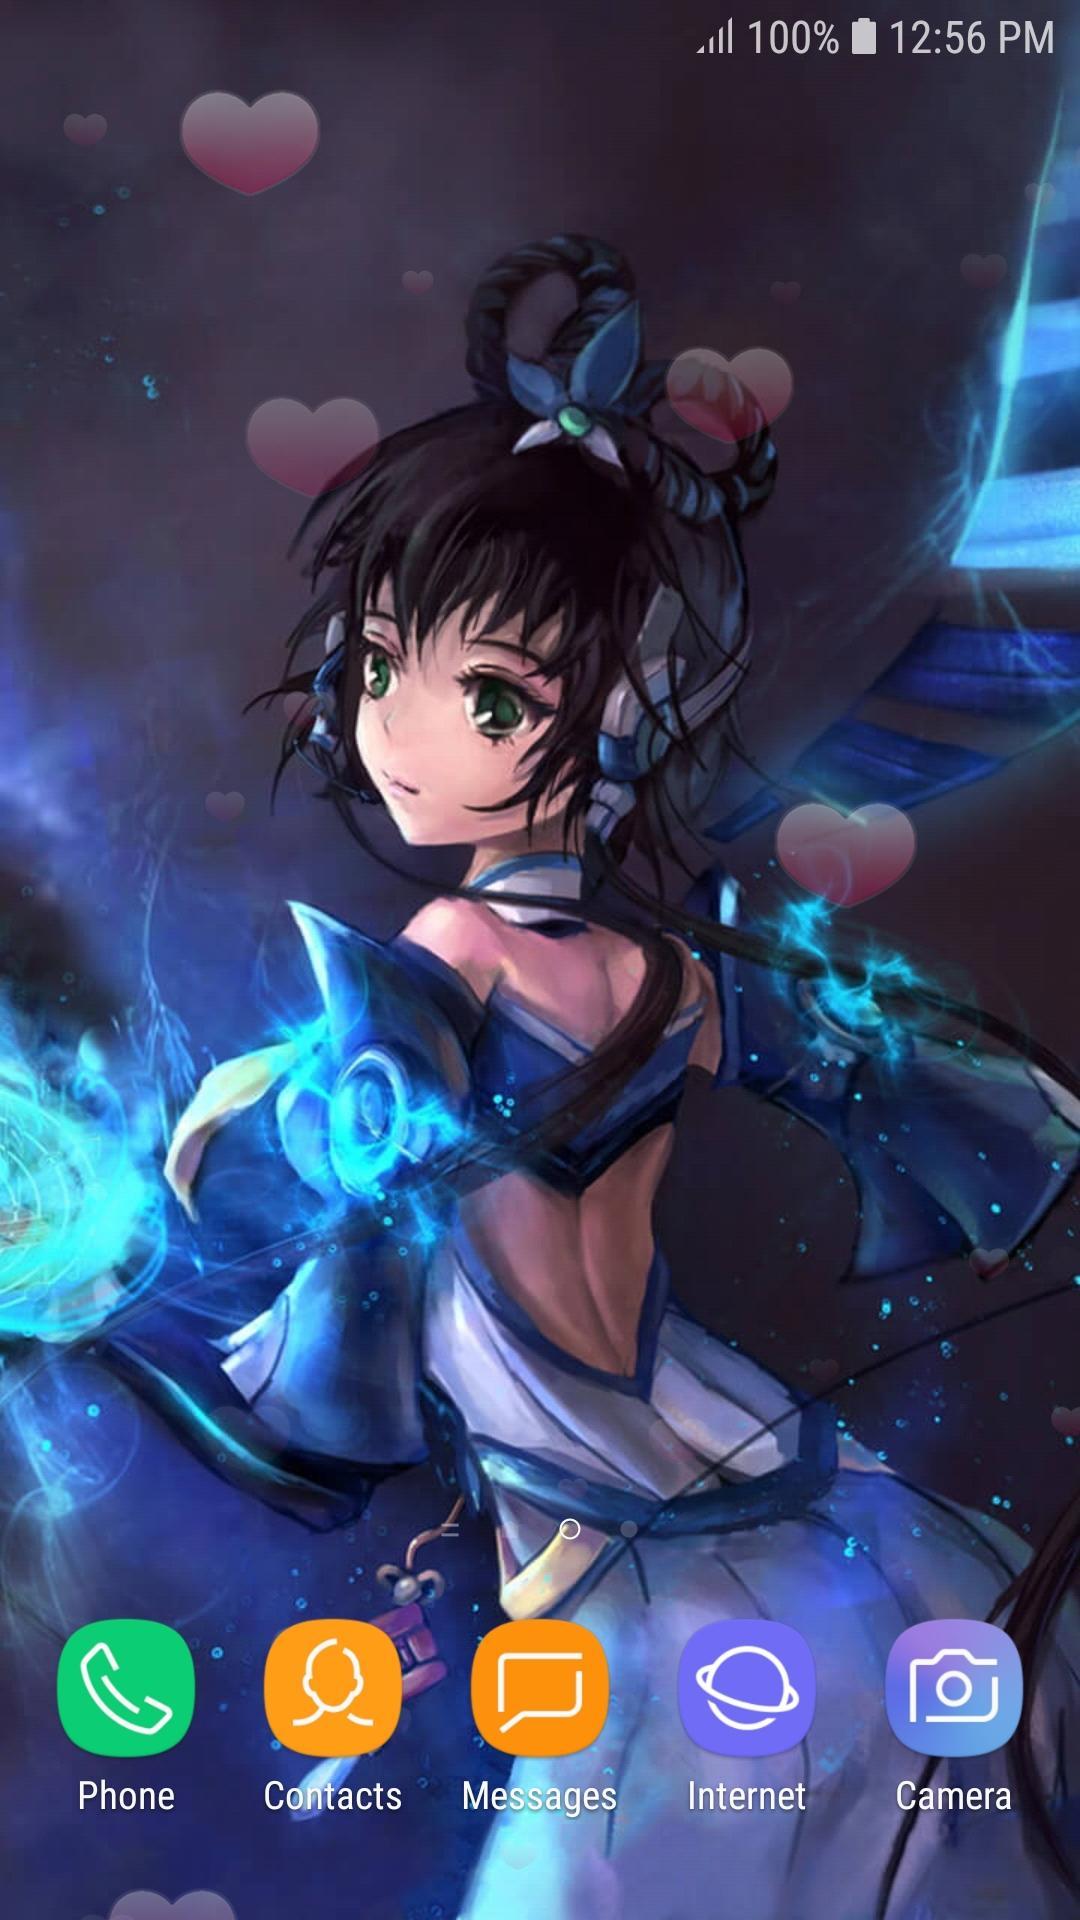 Anime Live Wallpaper Hd For Android Apk Download